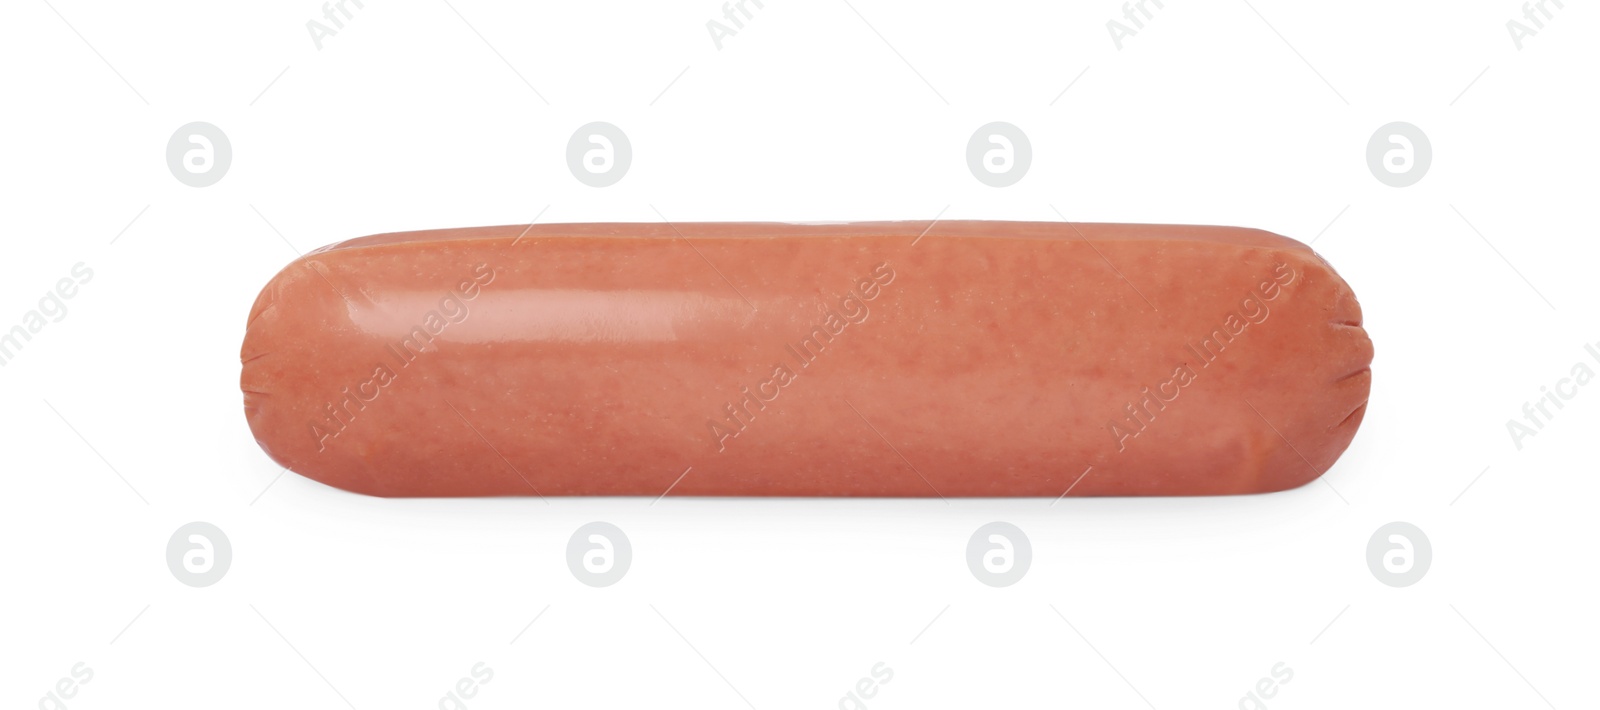 Photo of Raw sausage isolated on white. Vegan meat product